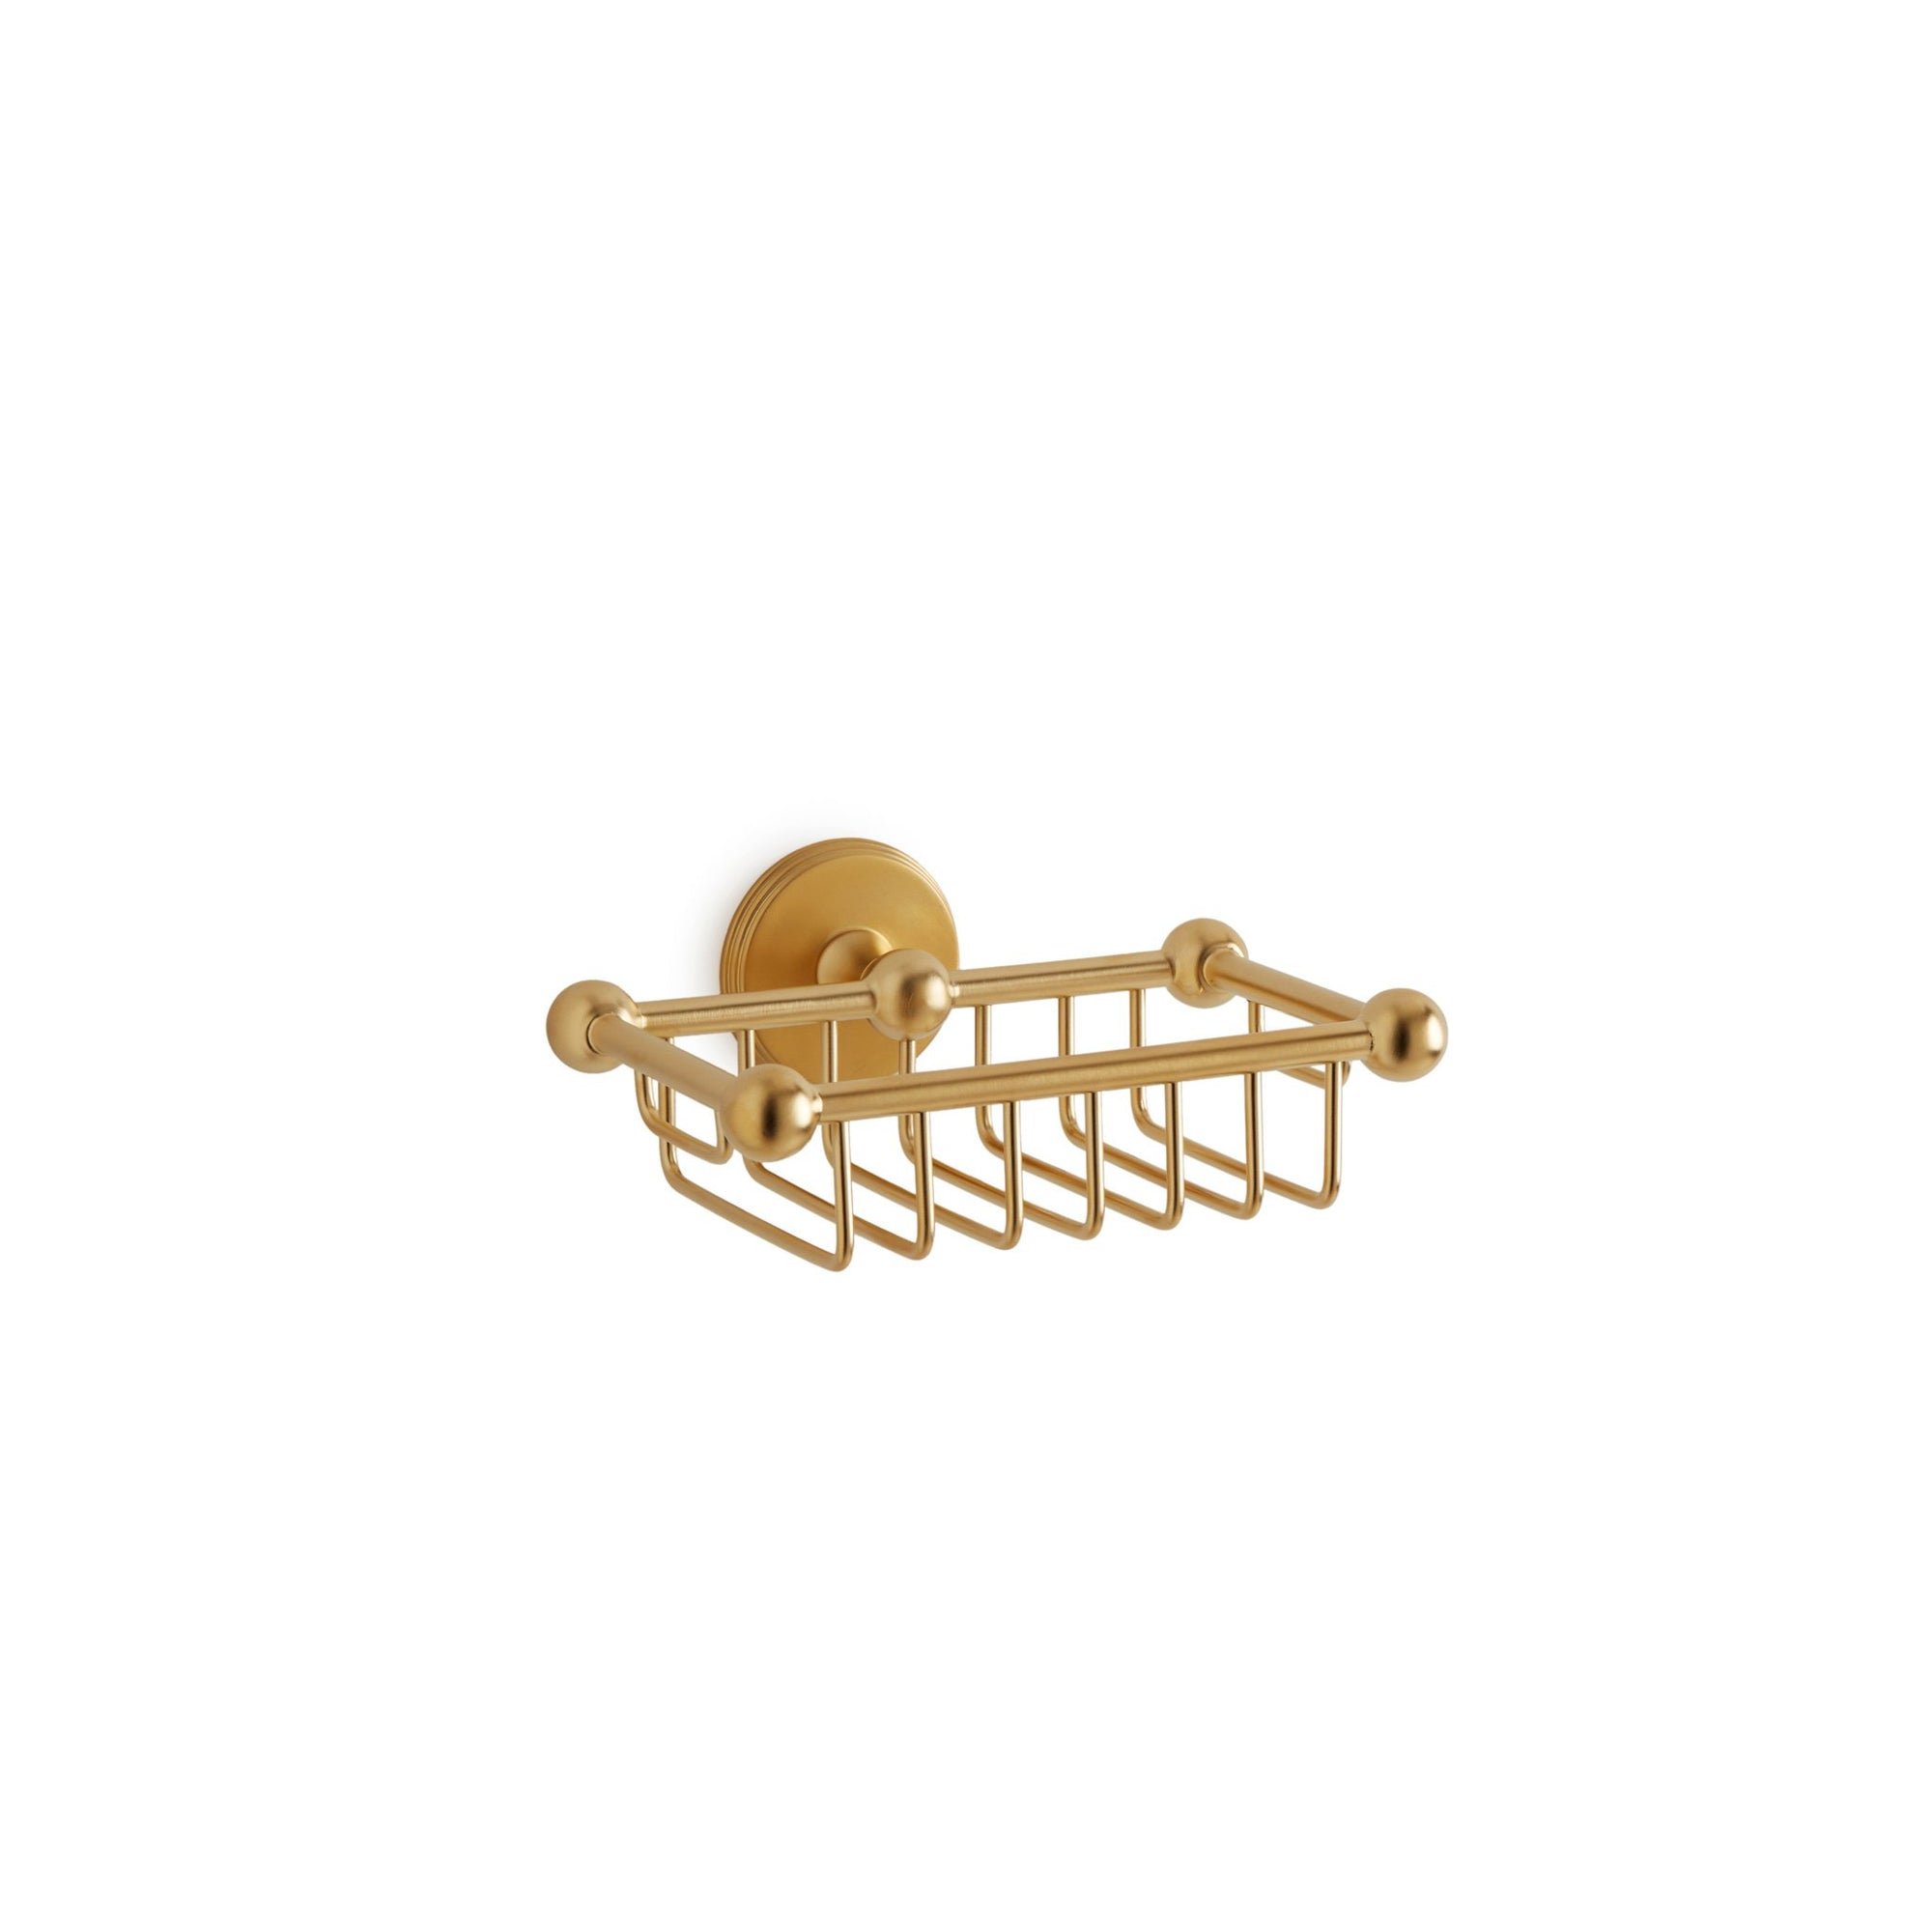 3804-GP Sherle Wagner International Wall Mounted Soap Basket in Gold Plate metal finish